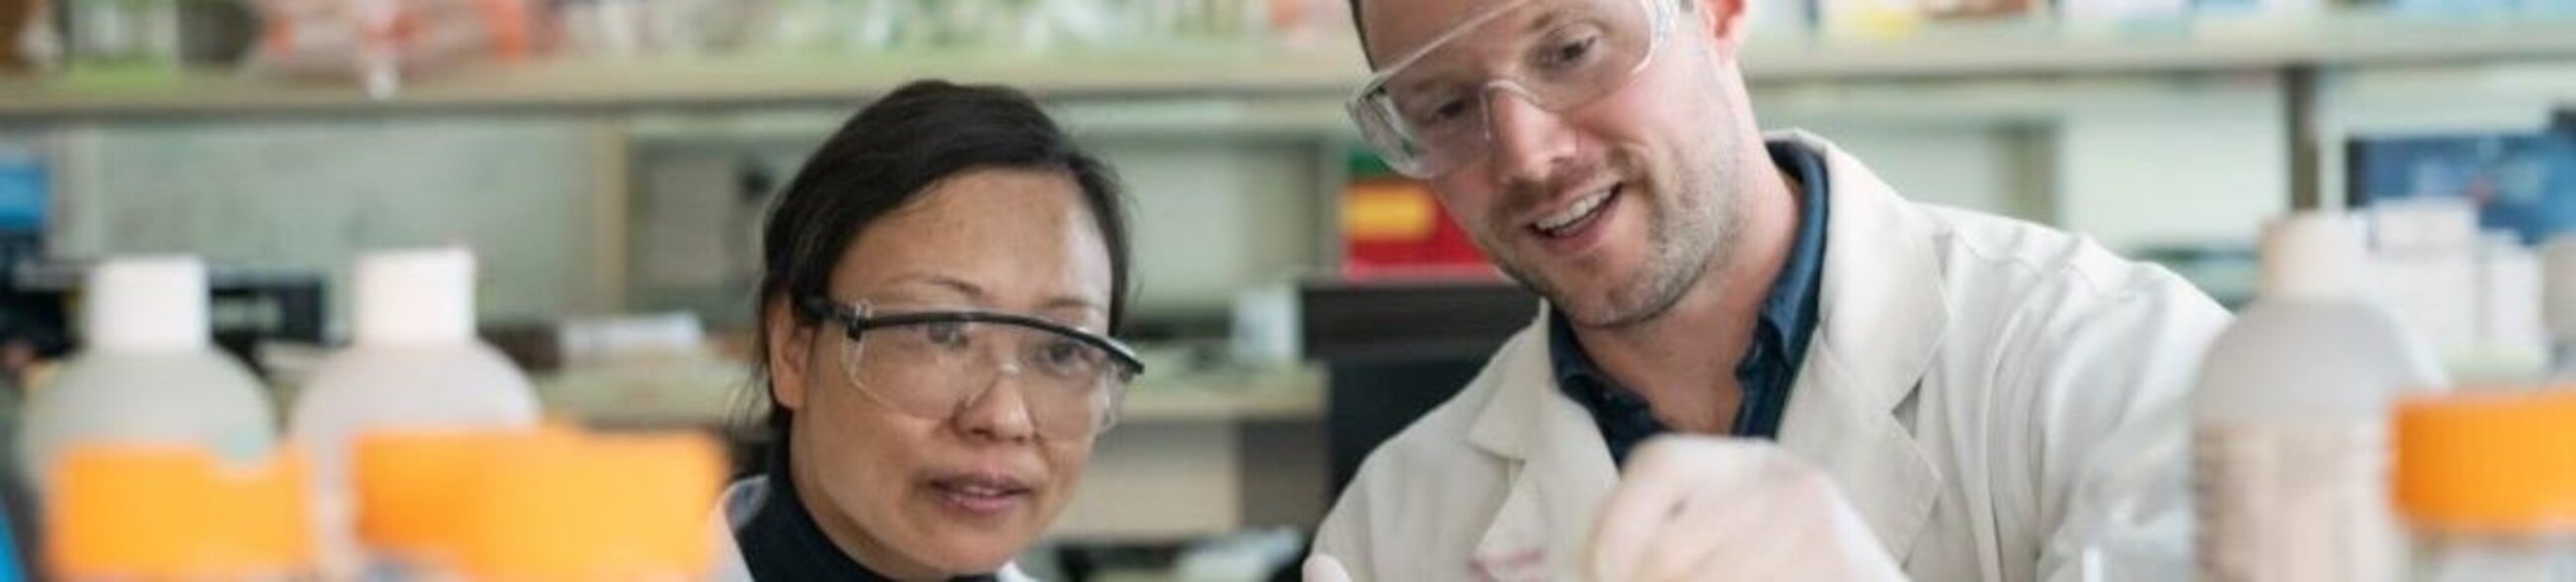 Two people in a lab wearing safety glasses and lab coats